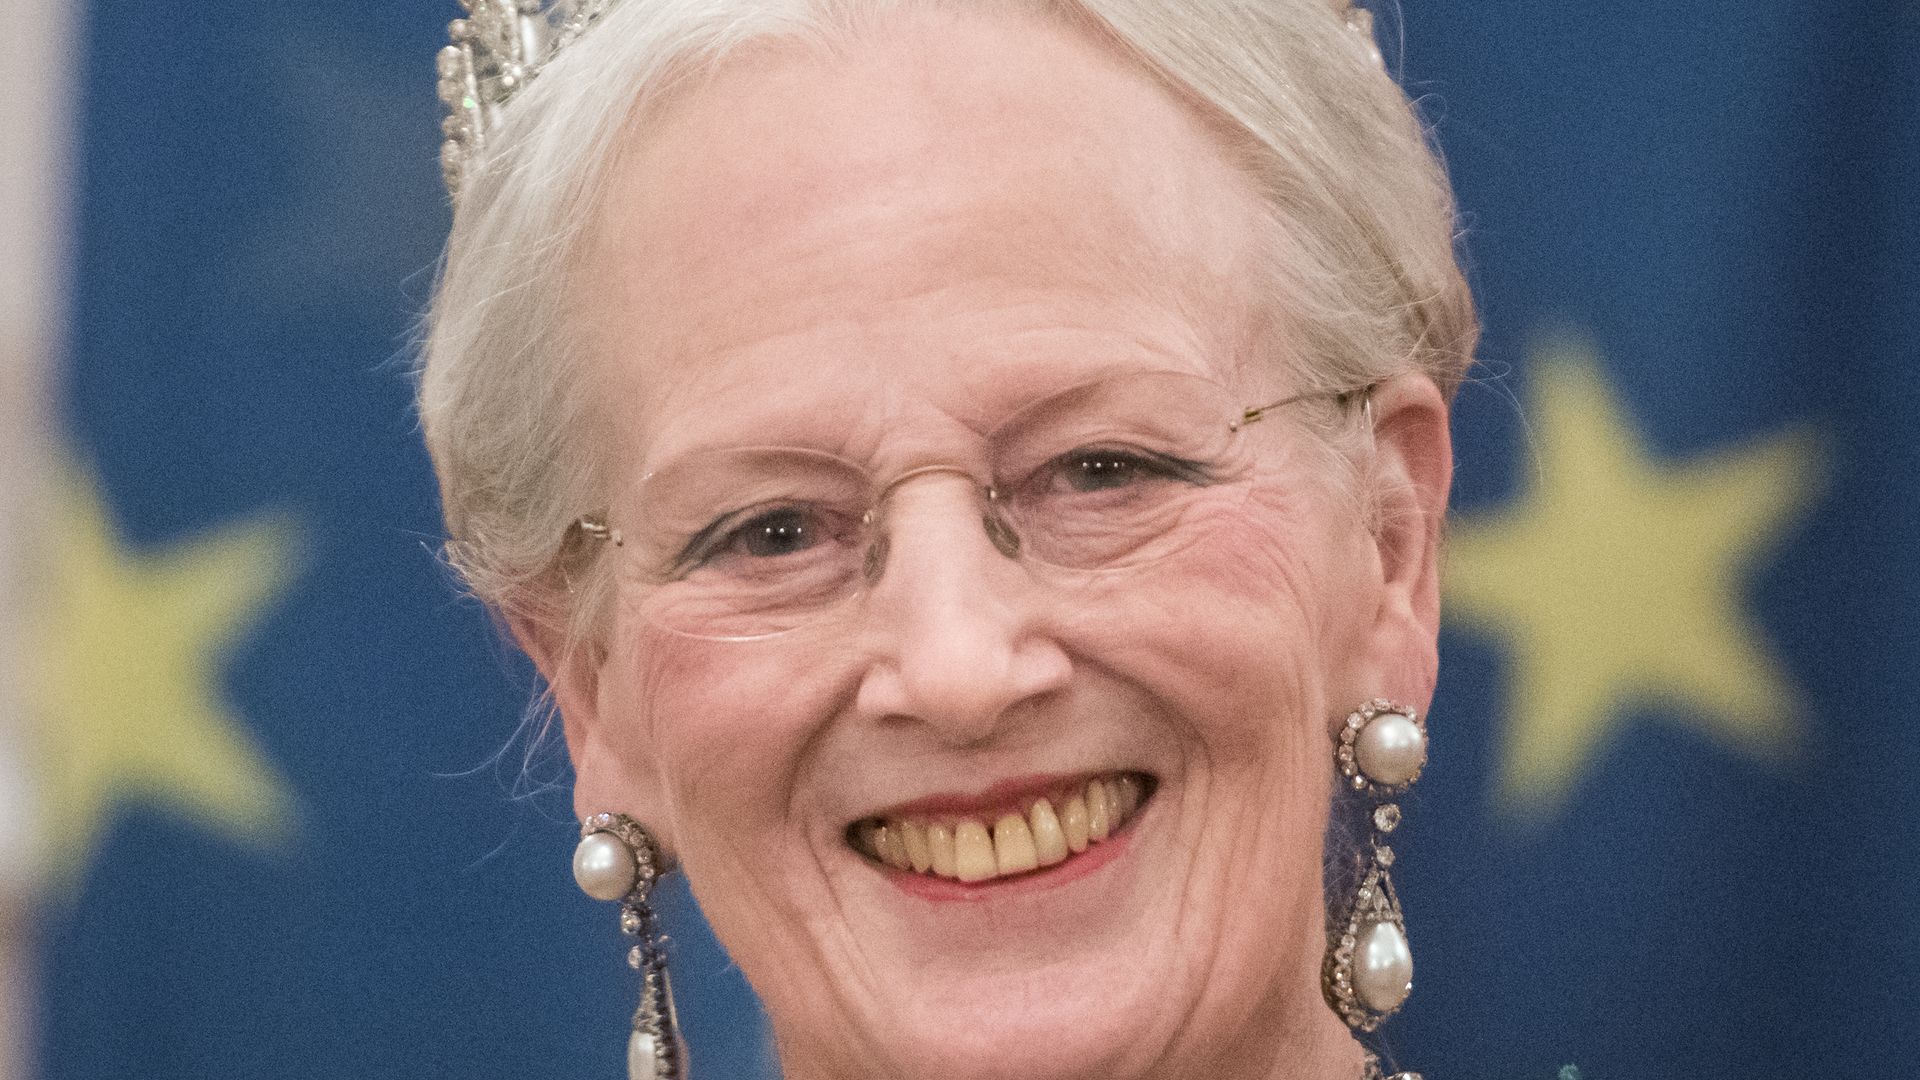  Queen Margrethe II of Denmark attends in a state banquet in Bellevue Palace 